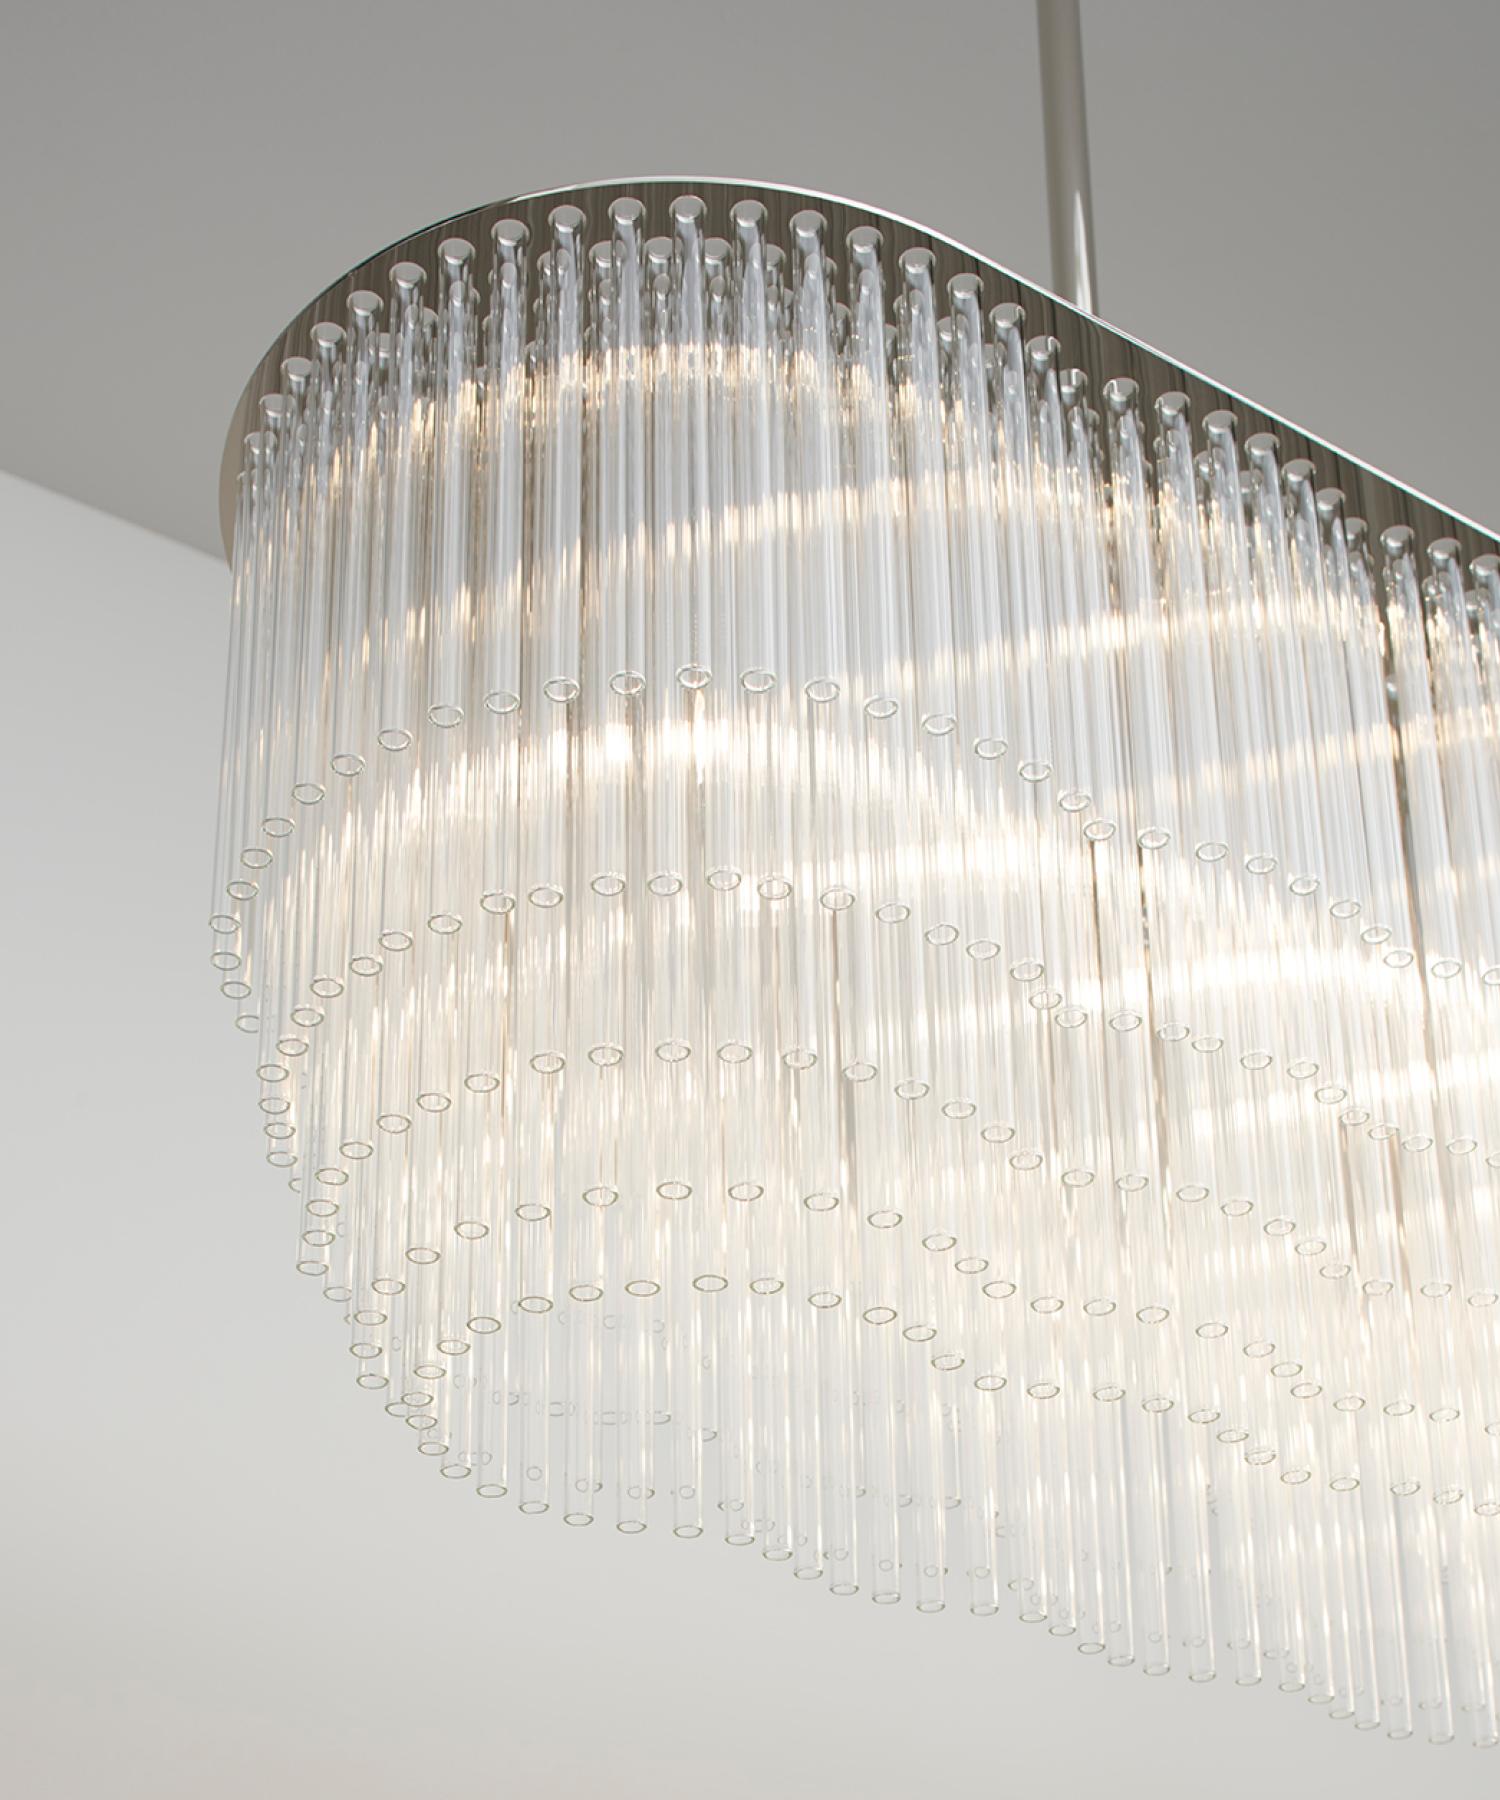 Contemporary Linear Chandelier 1479mm / 58.25